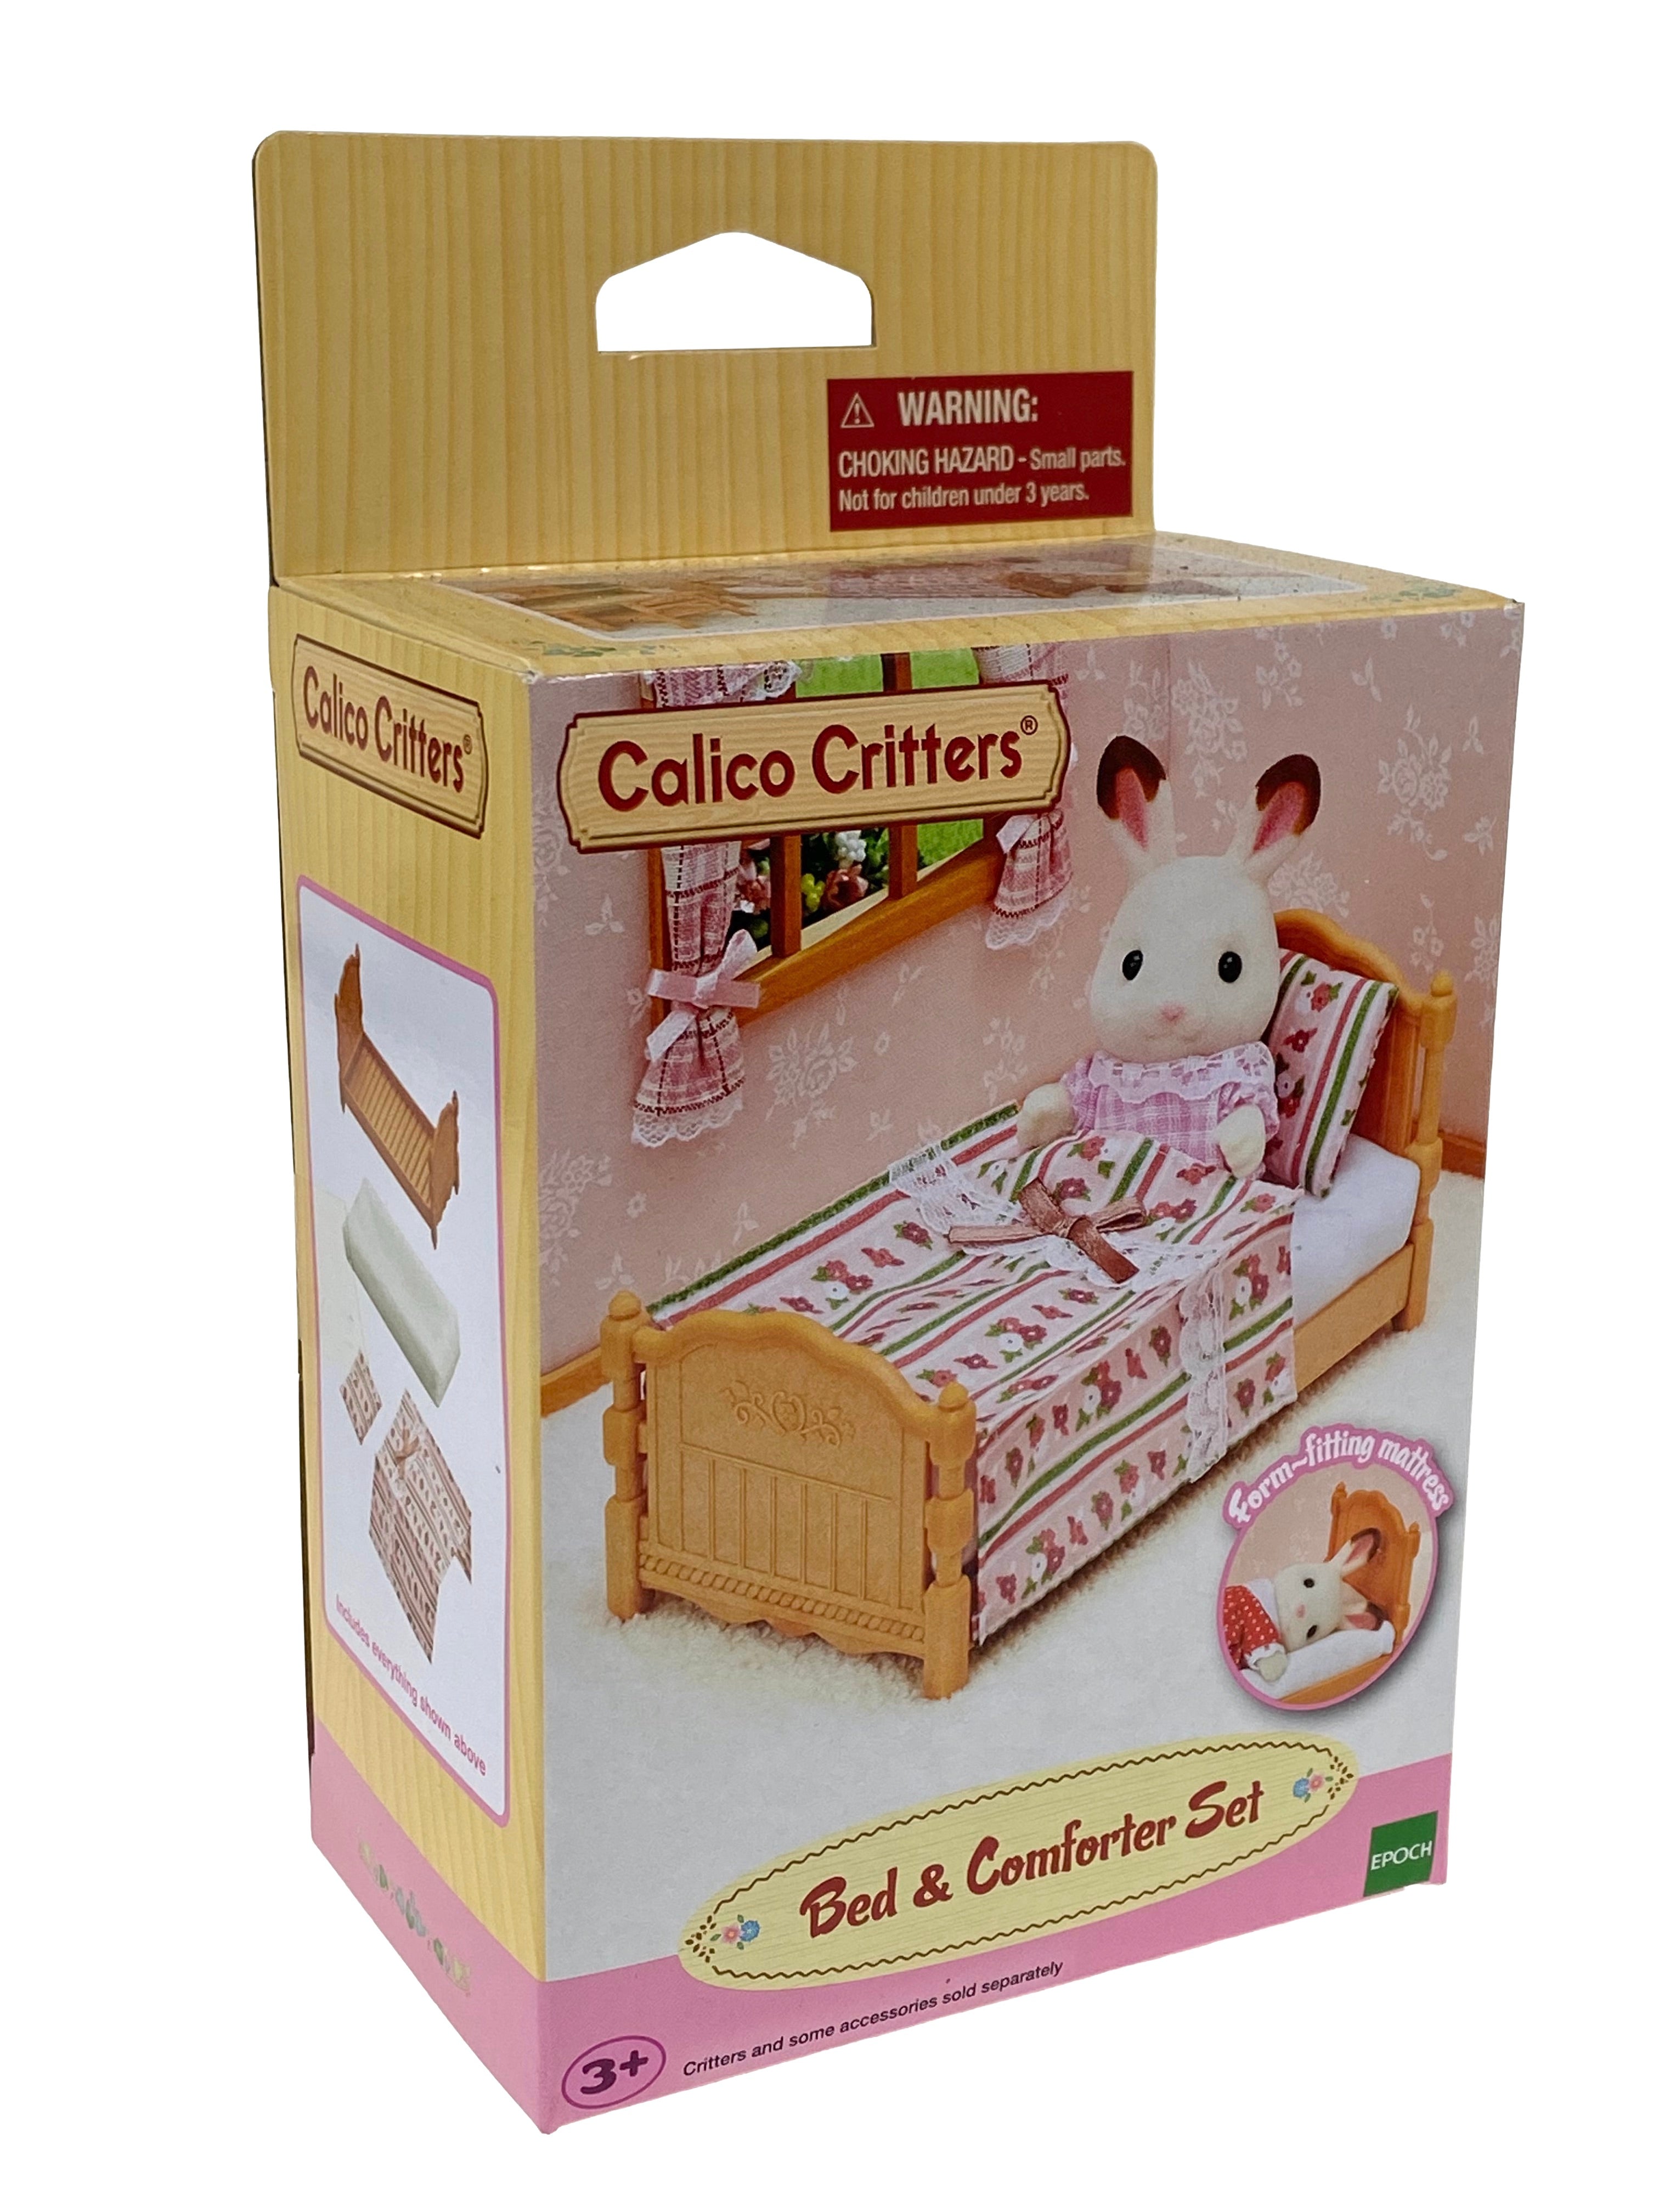 Calico Critters Bed & Comforter Set    